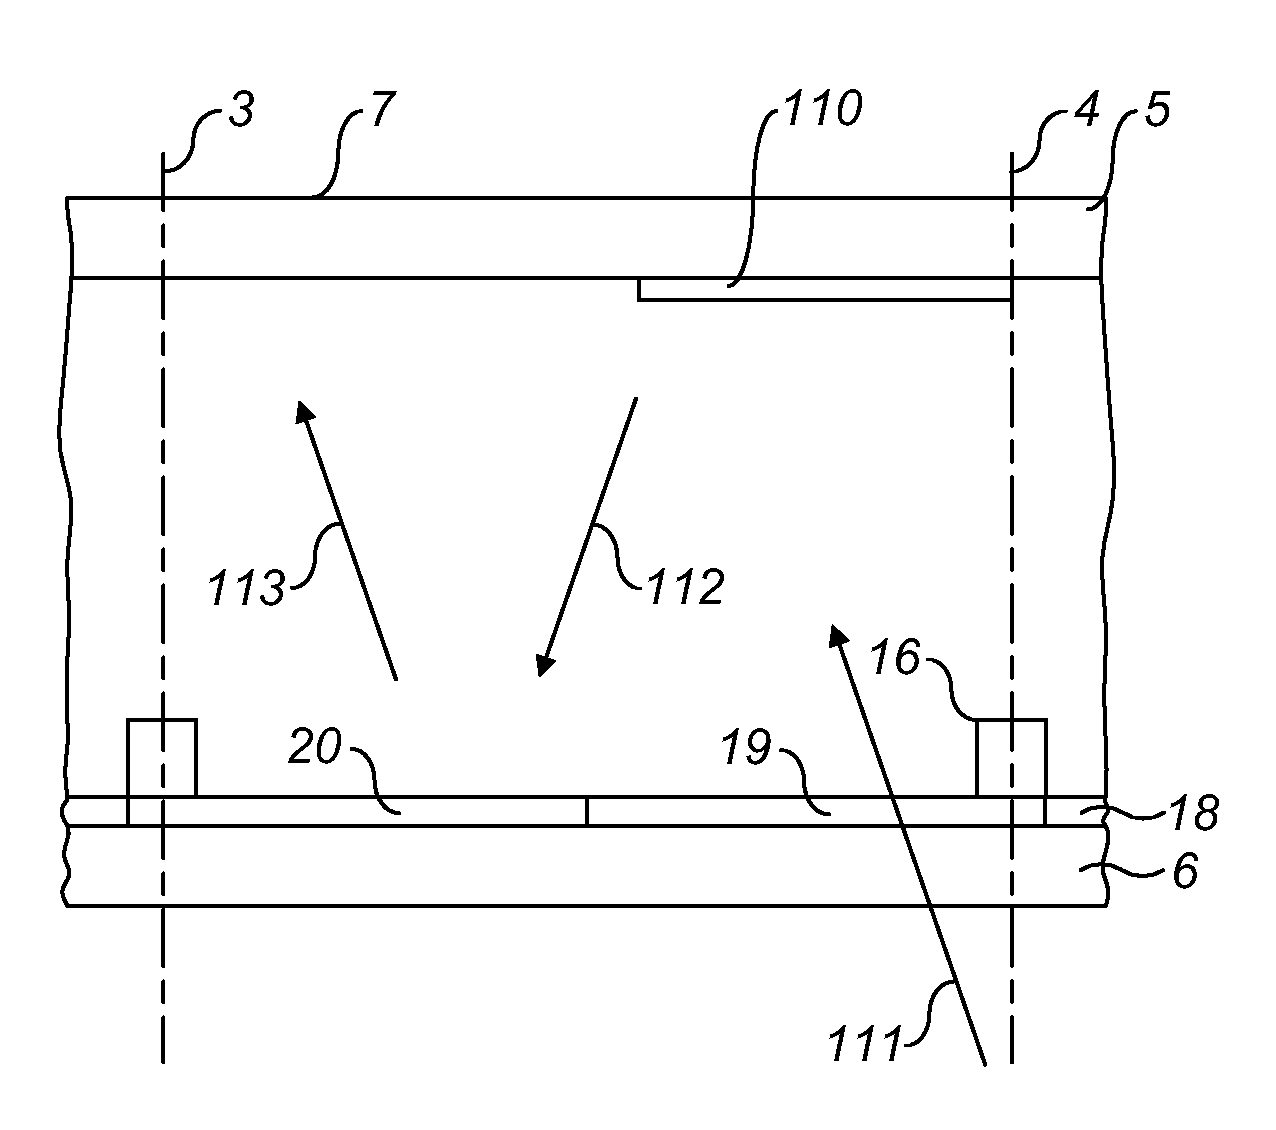 Transflective electrowetting display device